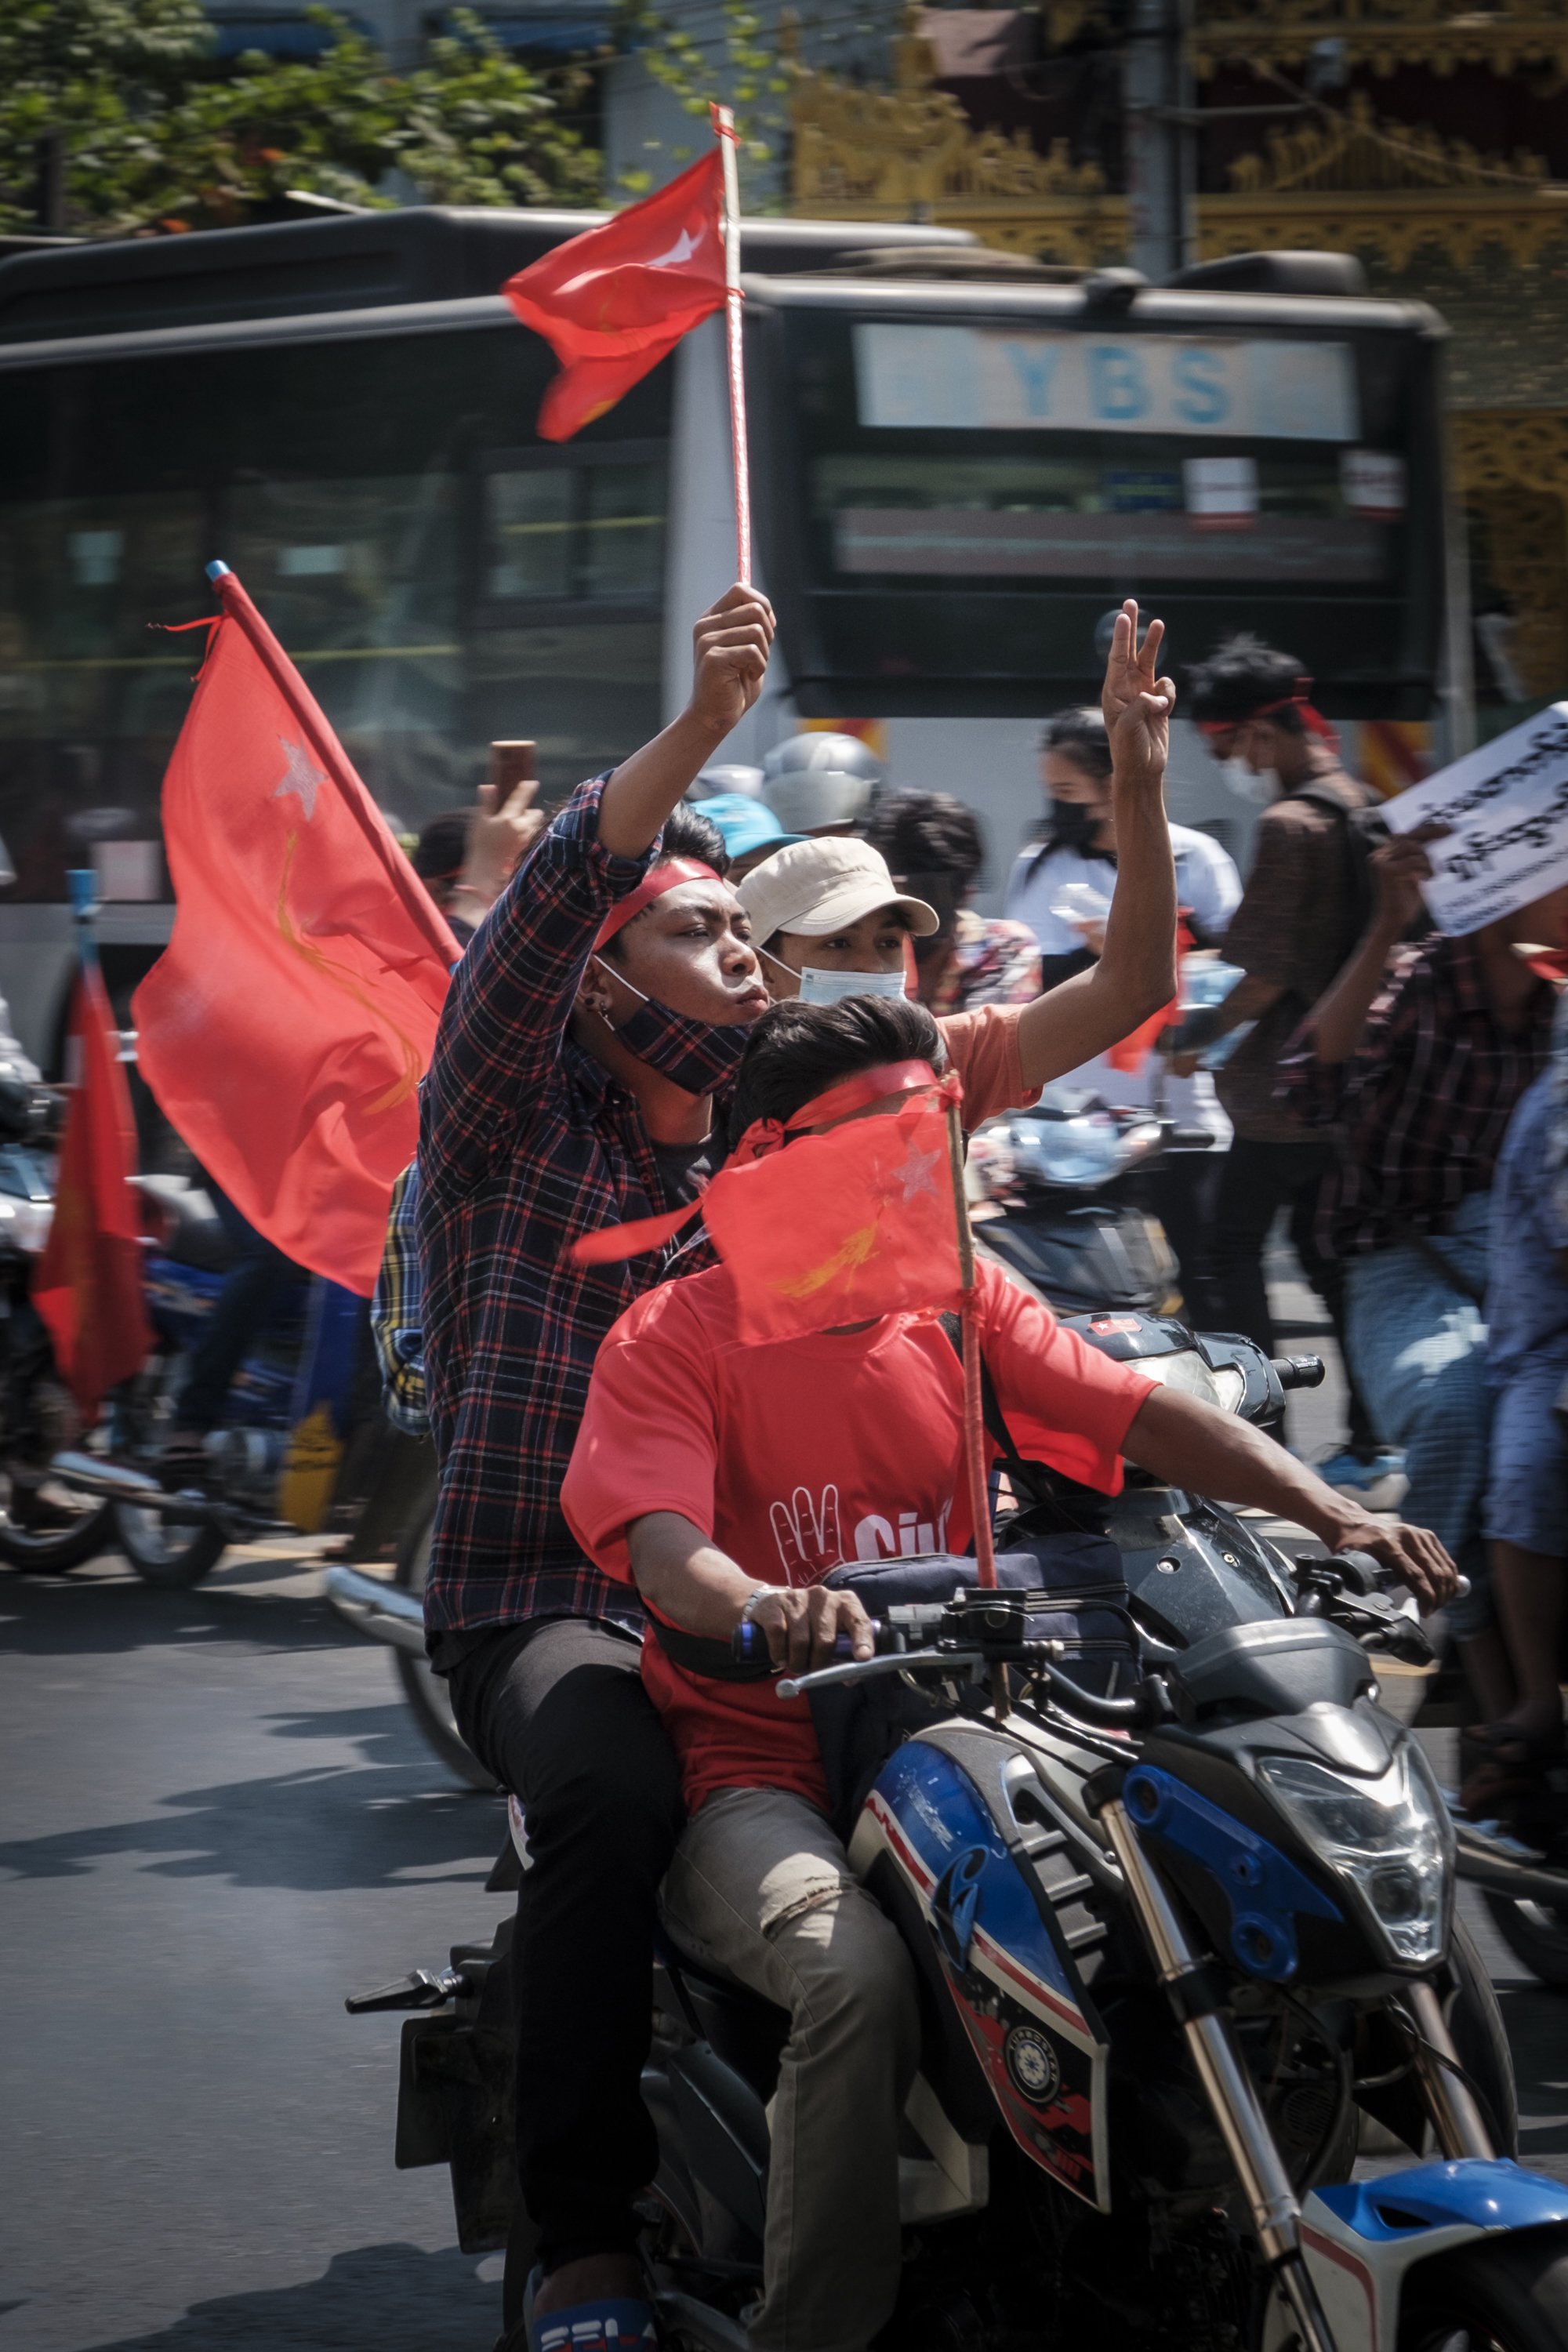  “On 1 February 2021, Myanmar’s military took power in a coup, abruptly halting the country’s fragile transition towards democracy. In the weeks following the coup, huge numbers of people took to the streets for mass protests. The military responded 